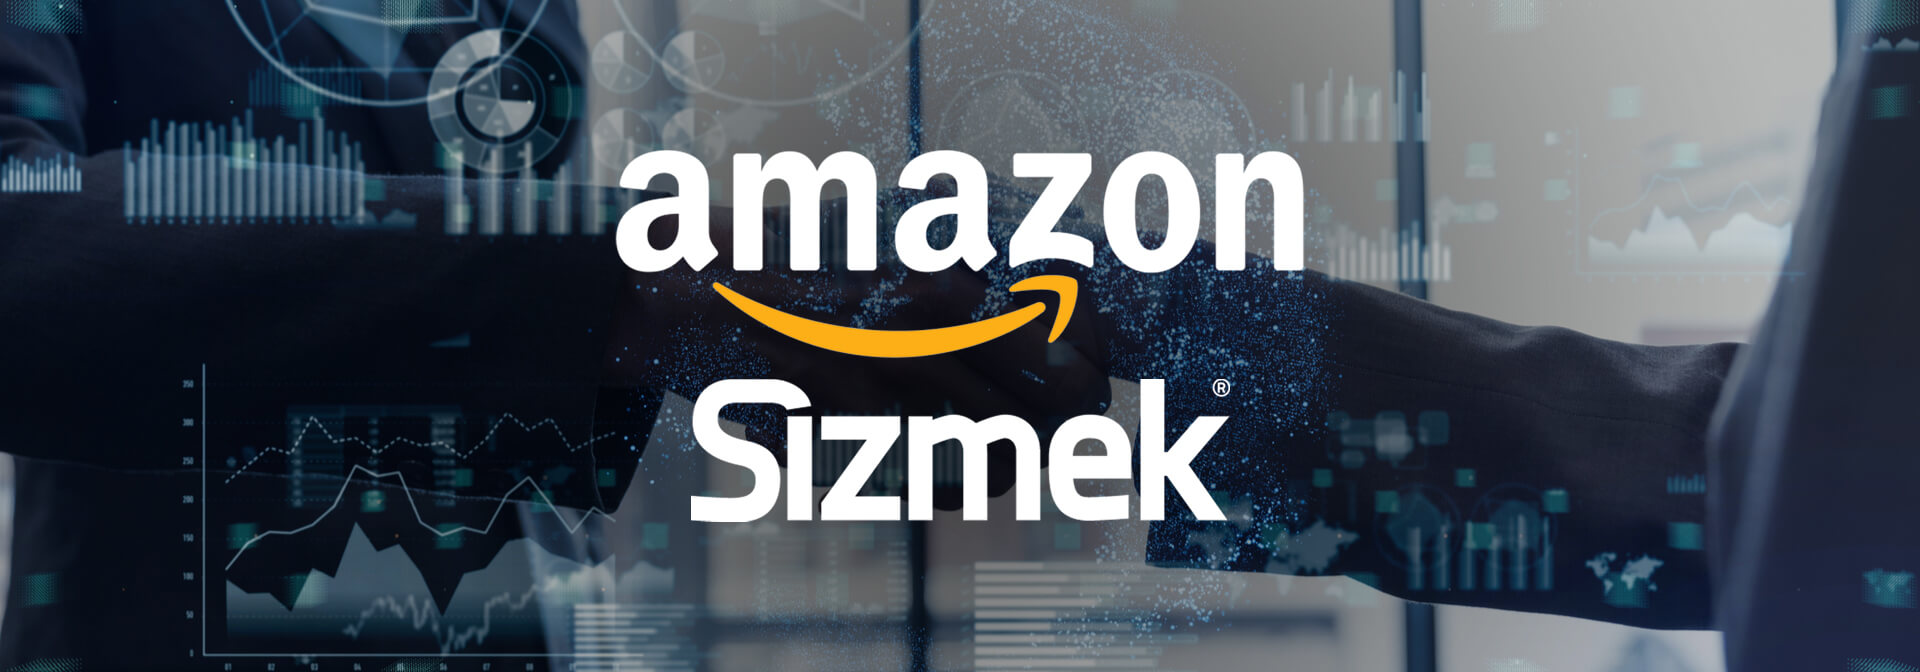 Amazon scoops up Sizmek’s Ad Server and DCO business, carving out a space in the walled garden triopoly